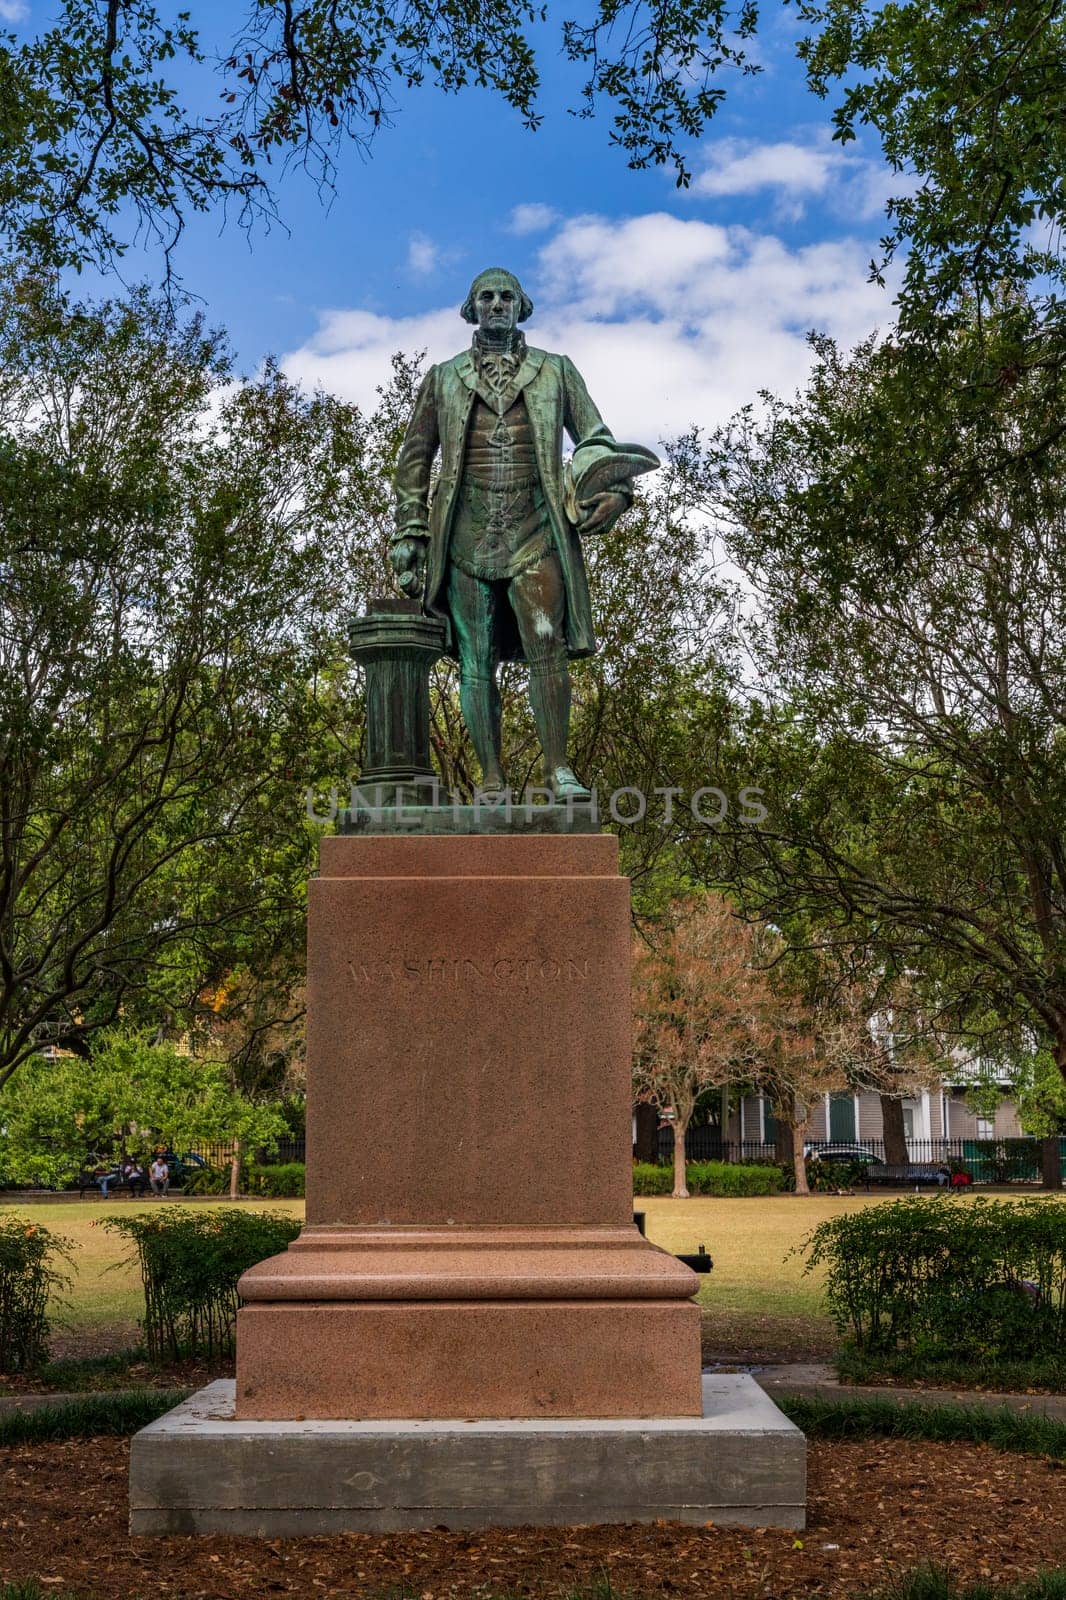 Statue of George Washington now in Marigny Park New Orleans by steheap